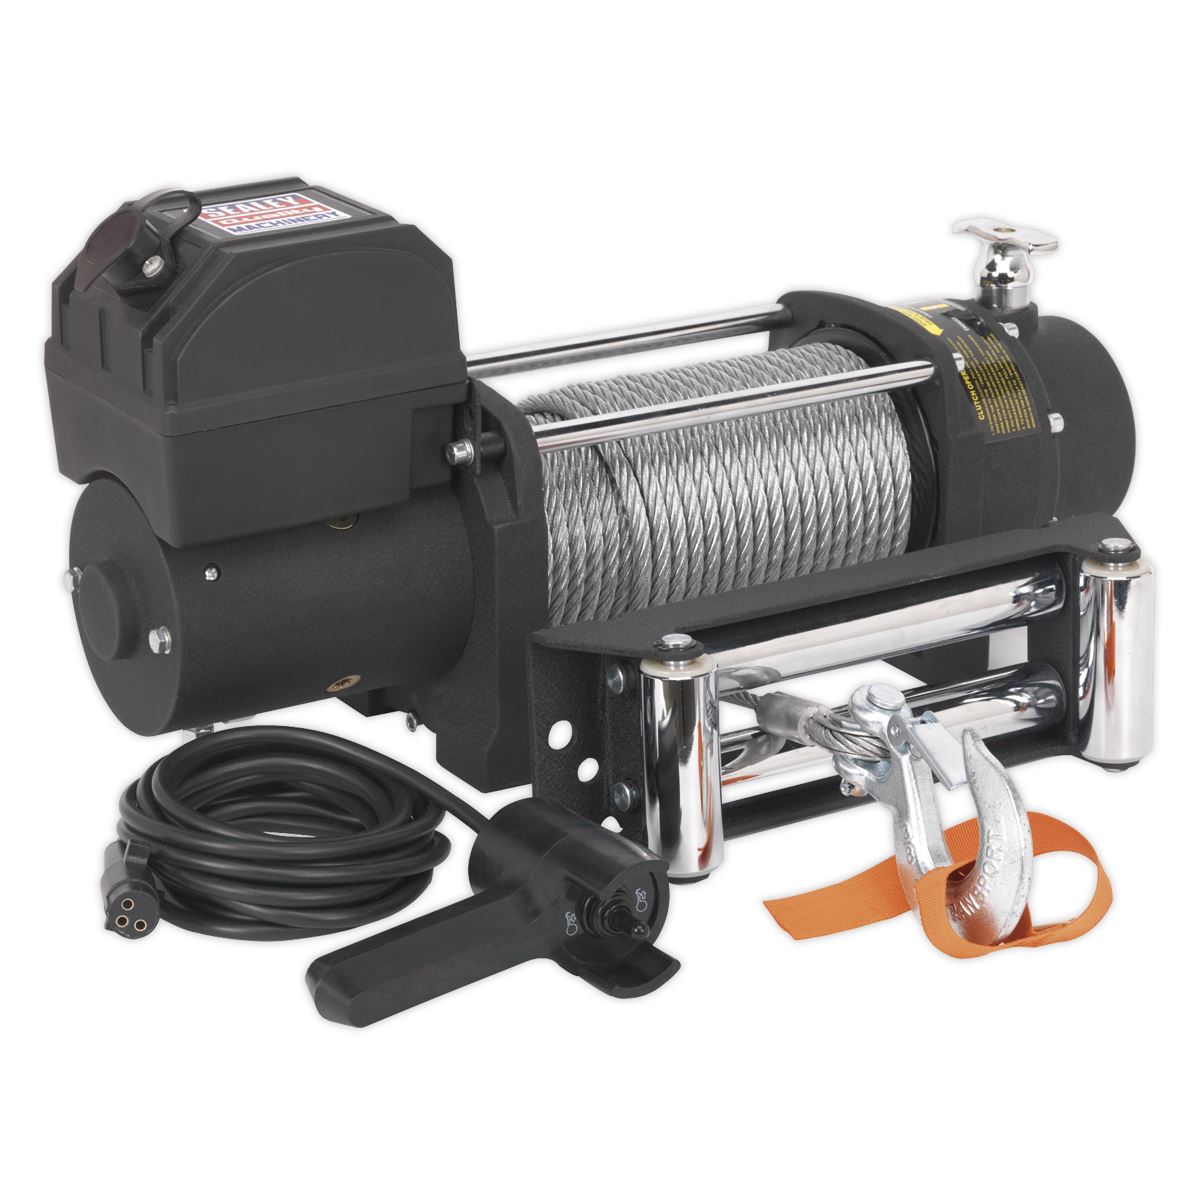 Sealey Premier Self-Recovery Winch 5450kg (12000lb) Line Pull 12V